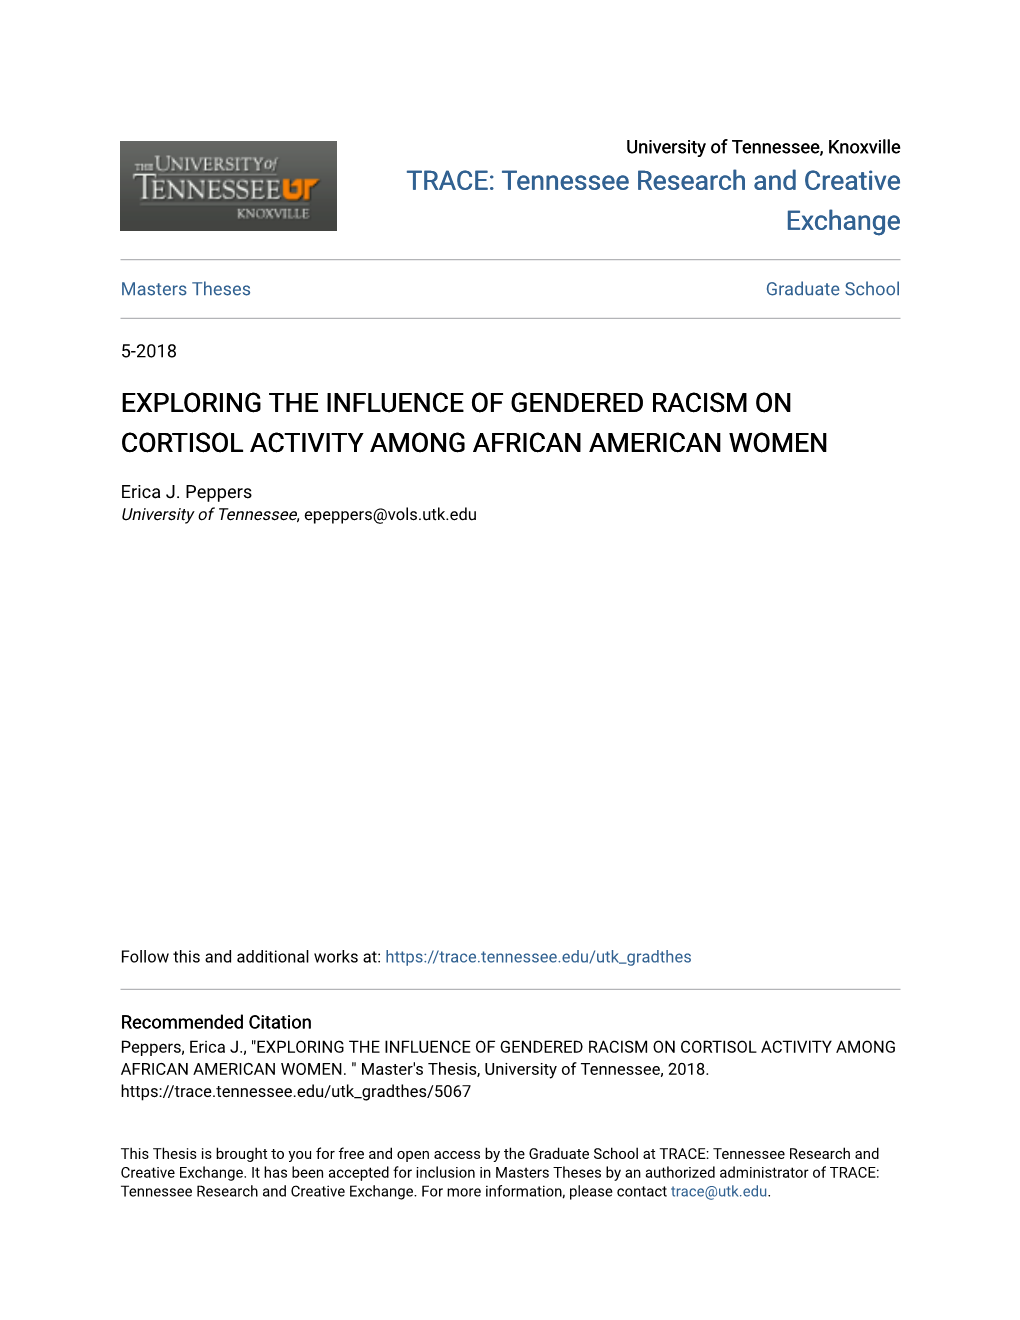 Exploring the Influence of Gendered Racism on Cortisol Activity Among African American Women